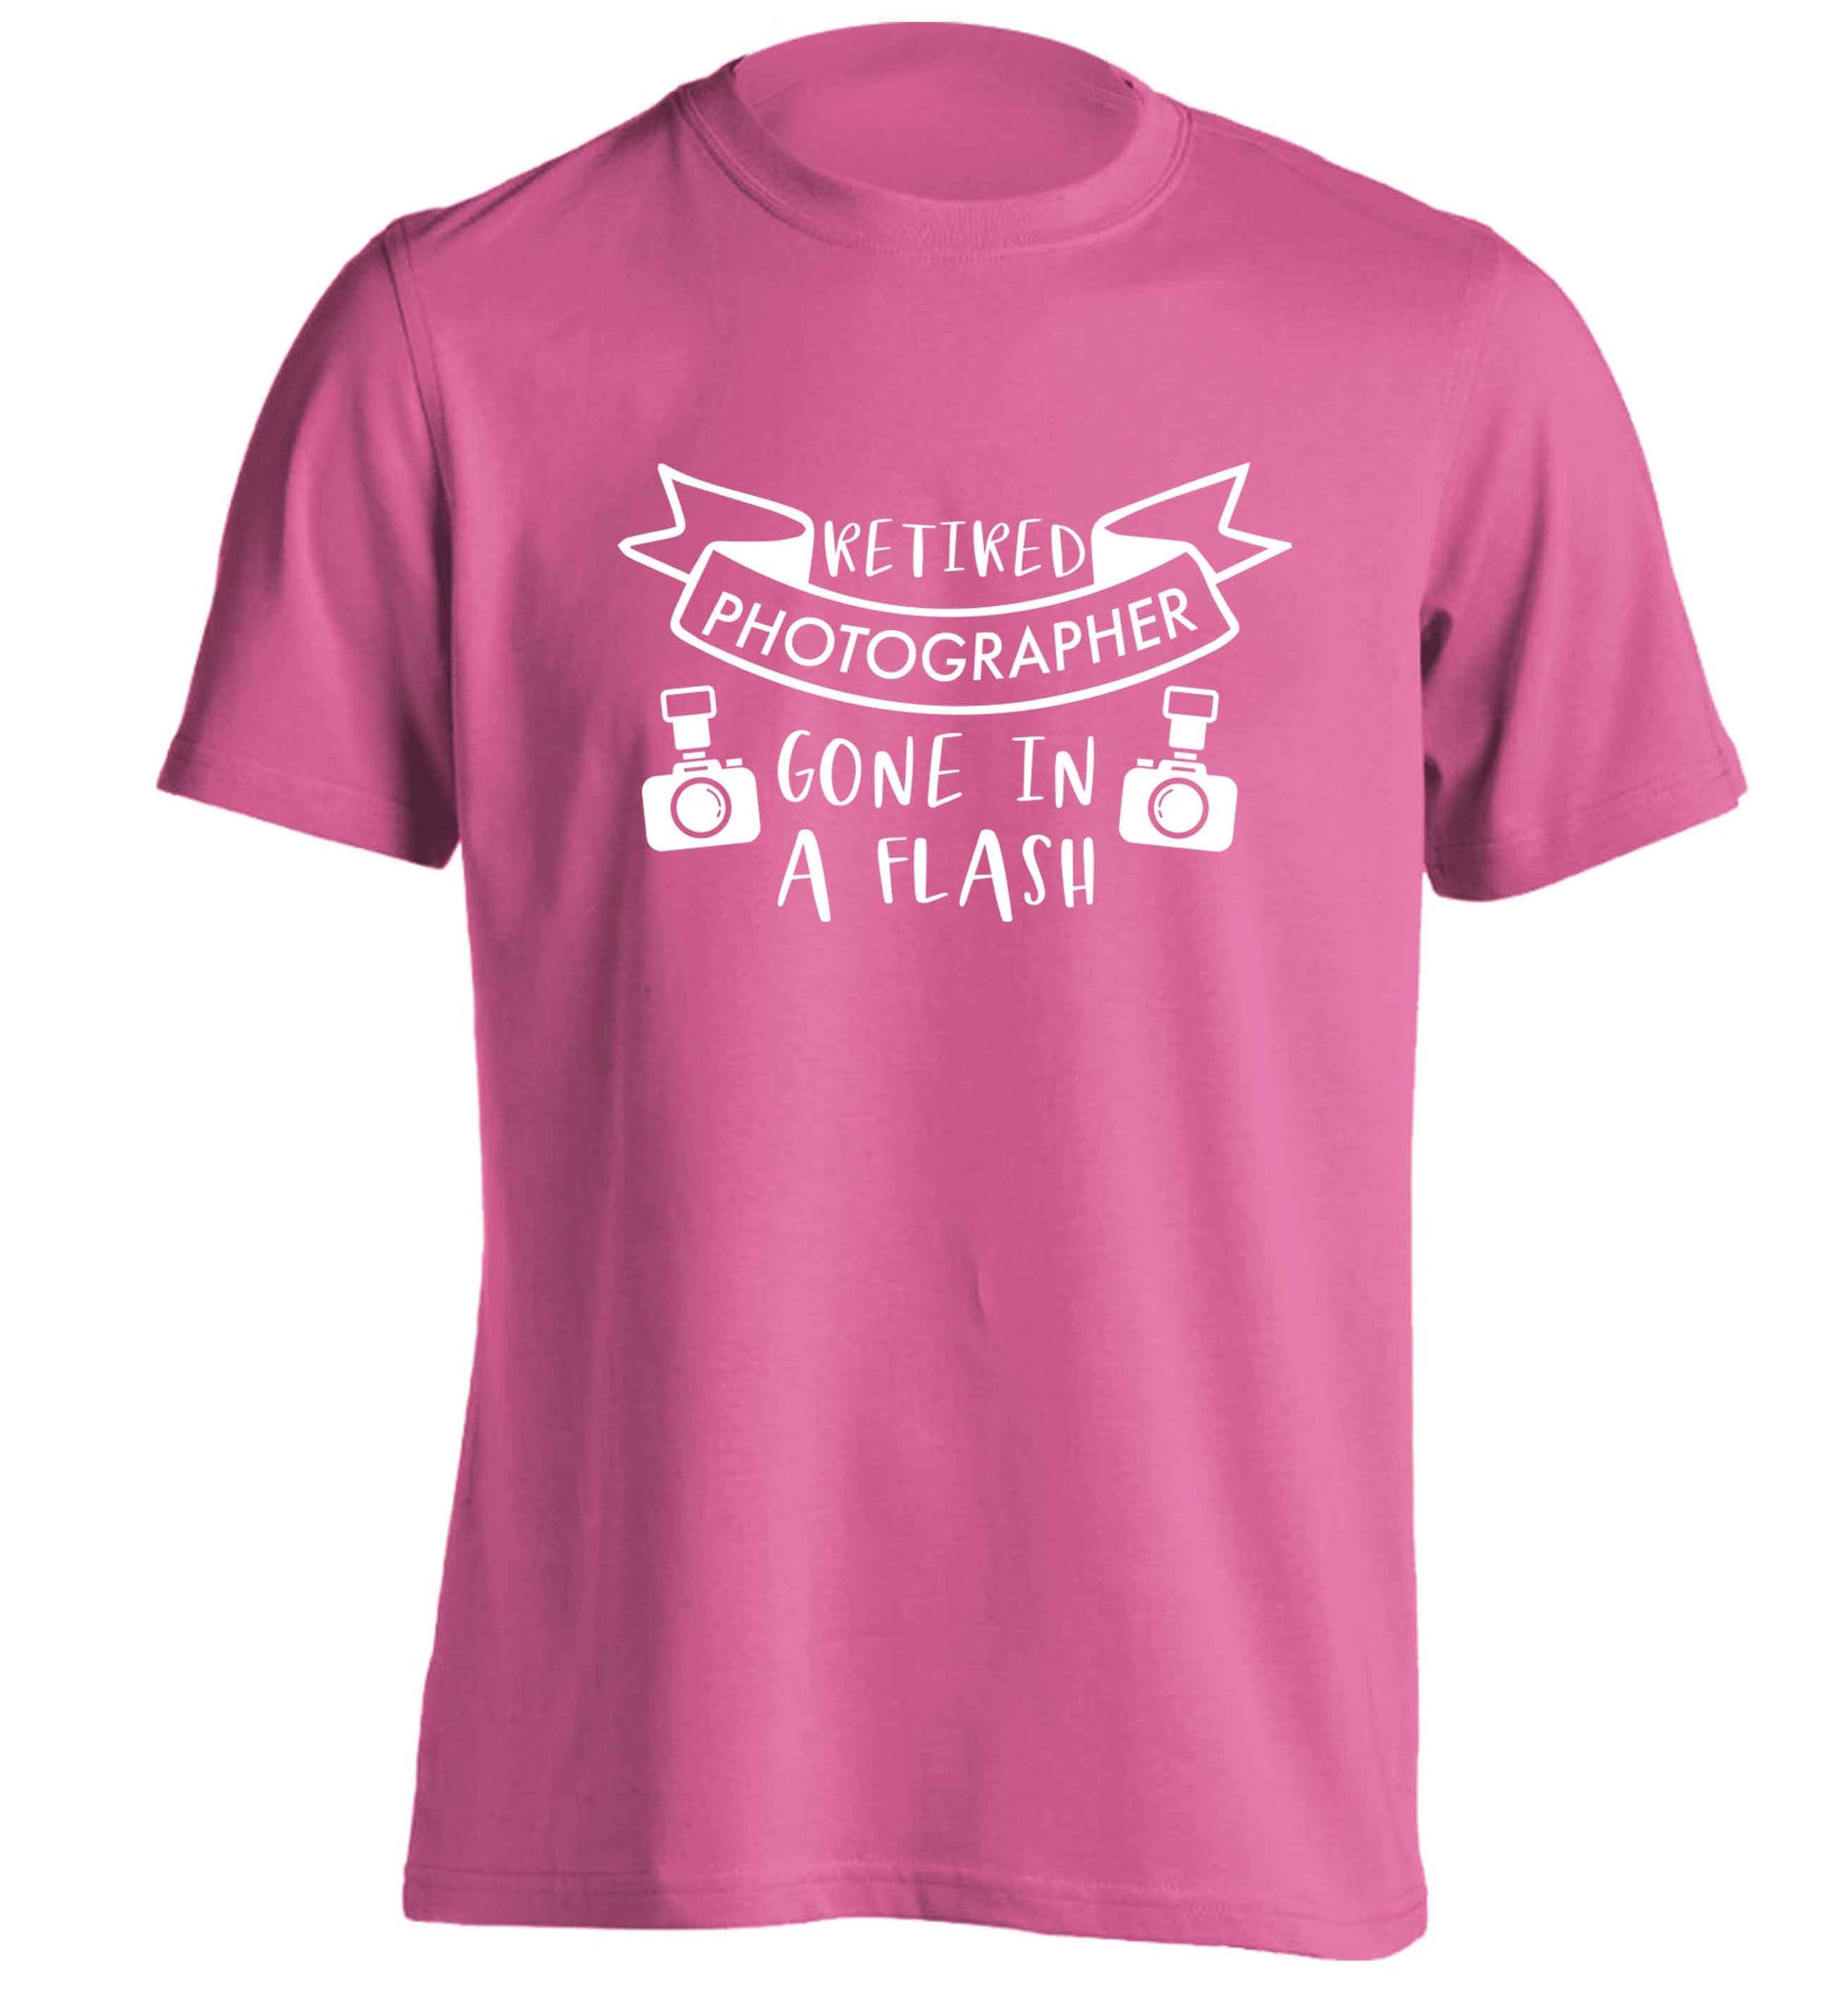 Retired photographer gone in a flash adults unisex pink Tshirt 2XL